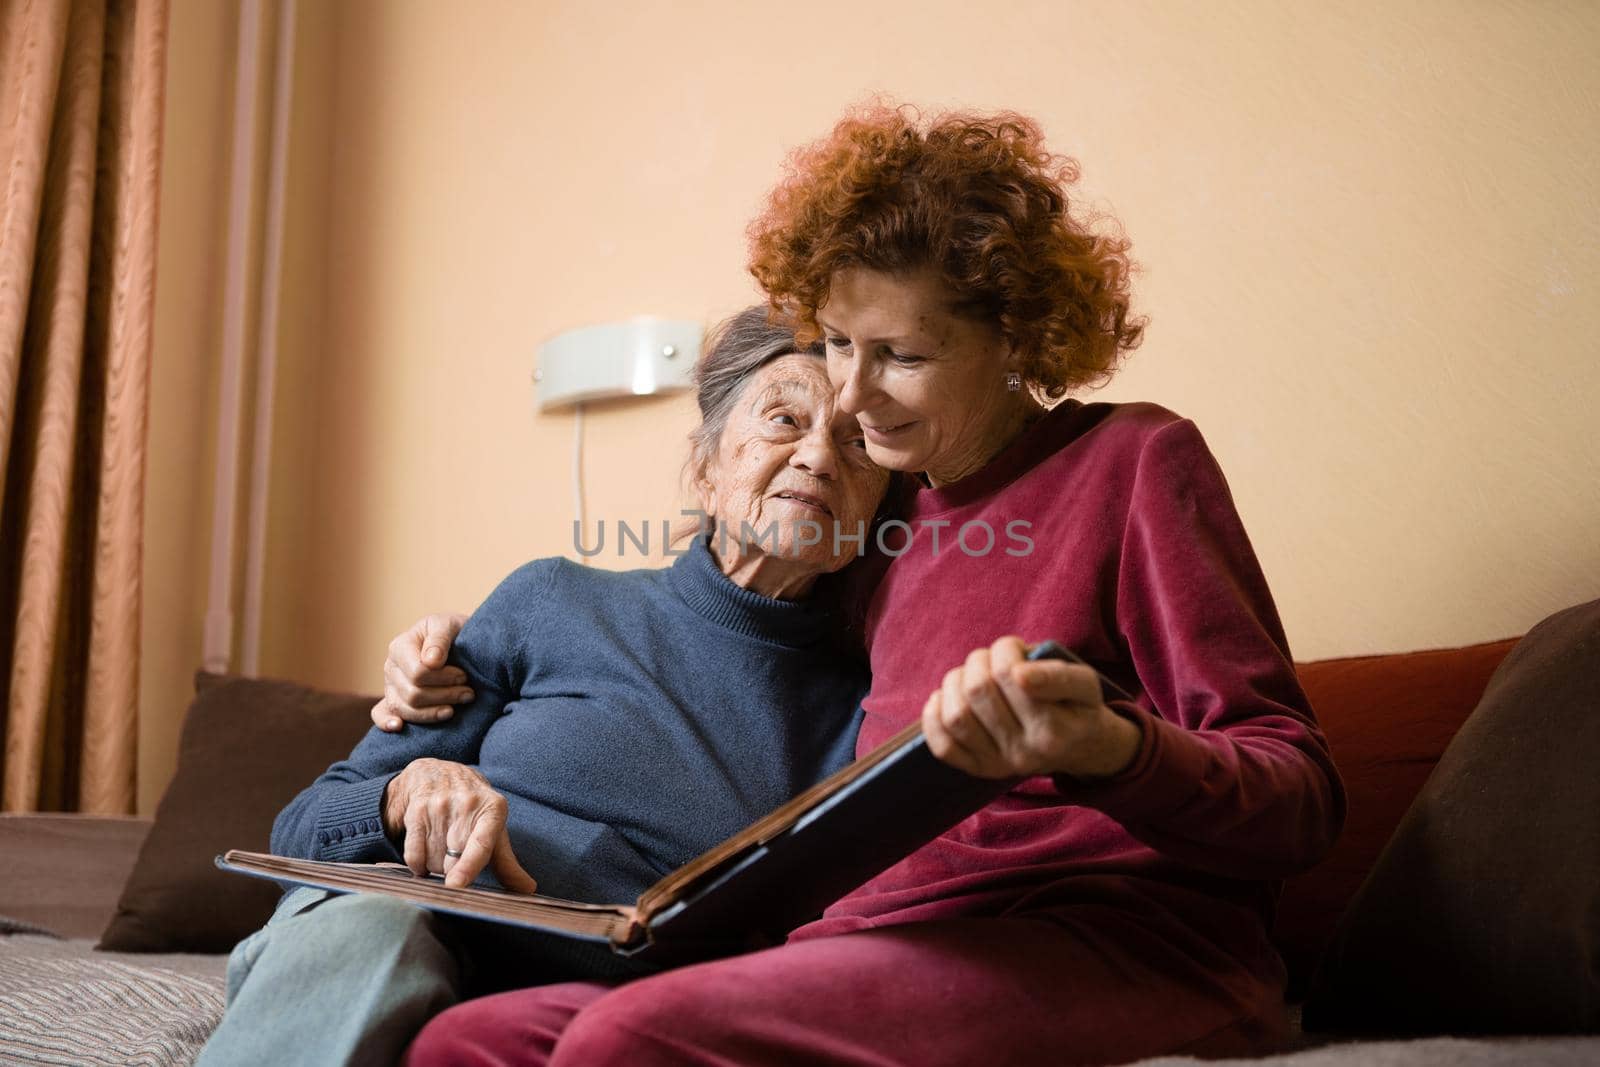 Mature daughter visits senior mother and has fun watching family photo album, sitting in embrace in living room couch. Mothers Day. Elderly woman and old gray hair grandmother laugh and remember youth